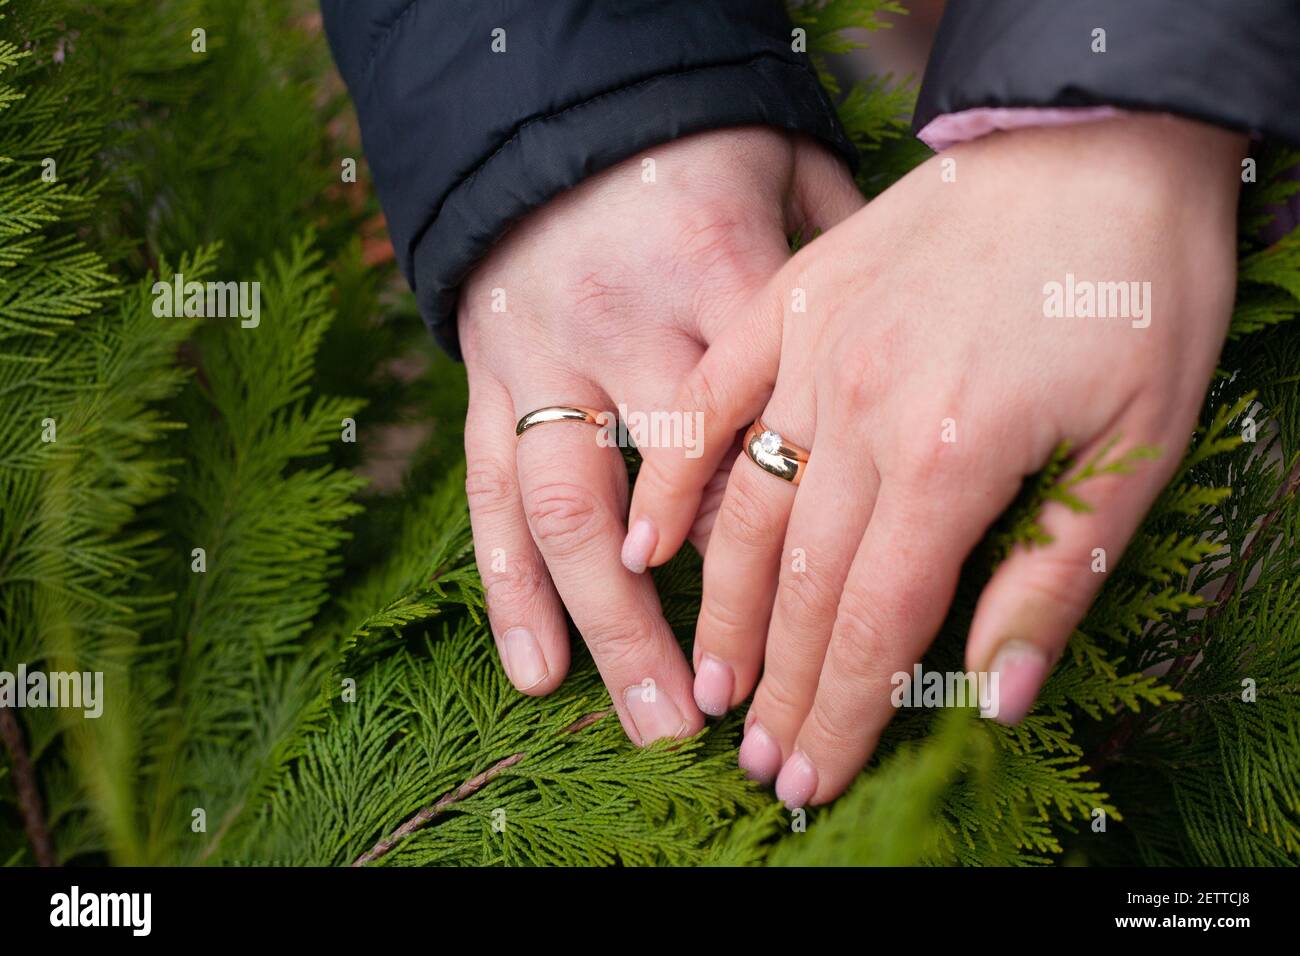 Husband and Wife S Rings/hands Stock Photo - Image of bands, love: 17967726